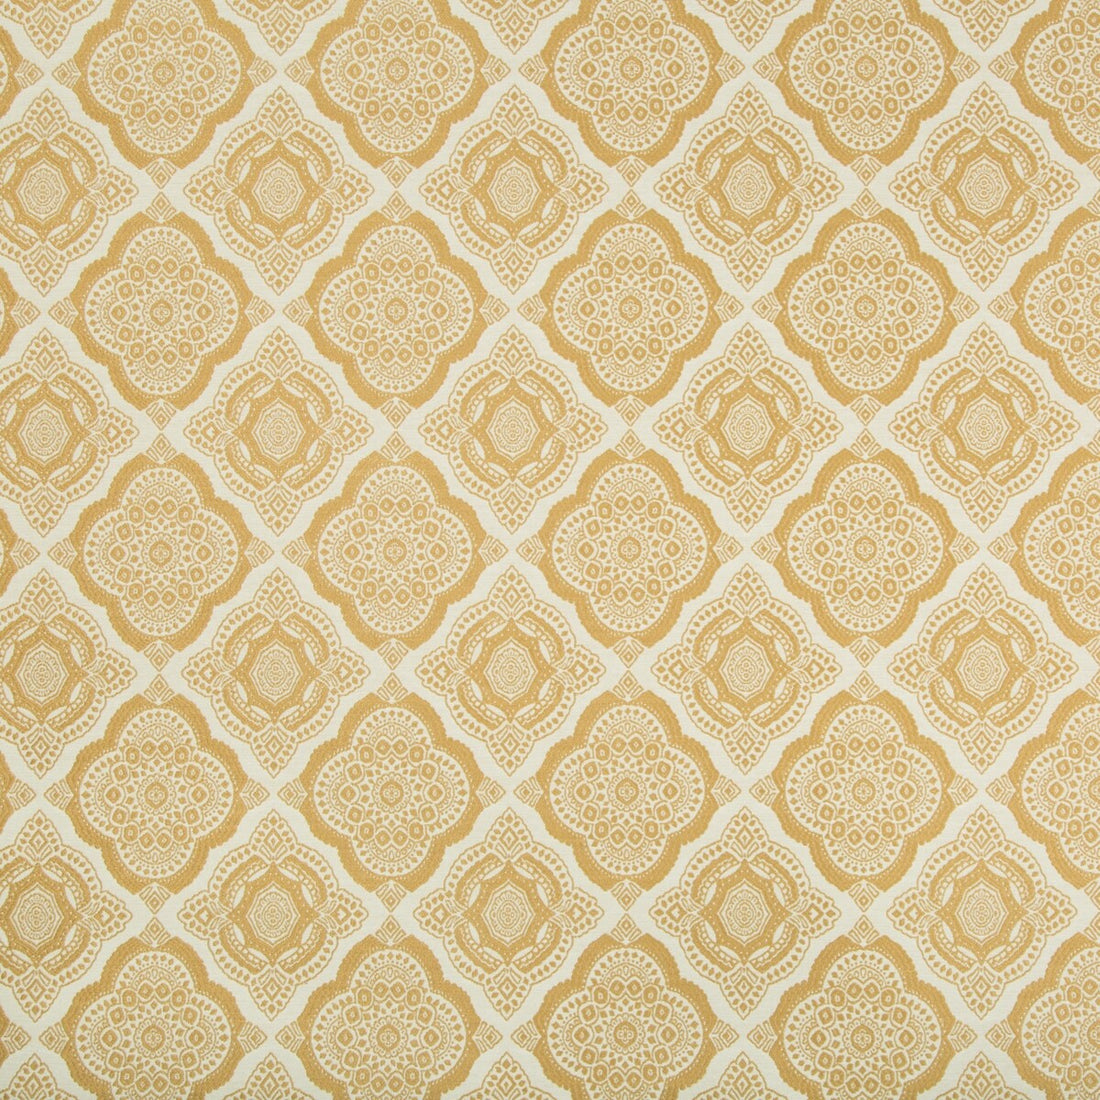 Kravet Design fabric in 34704-16 color - pattern 34704.16.0 - by Kravet Design in the Crypton Home collection